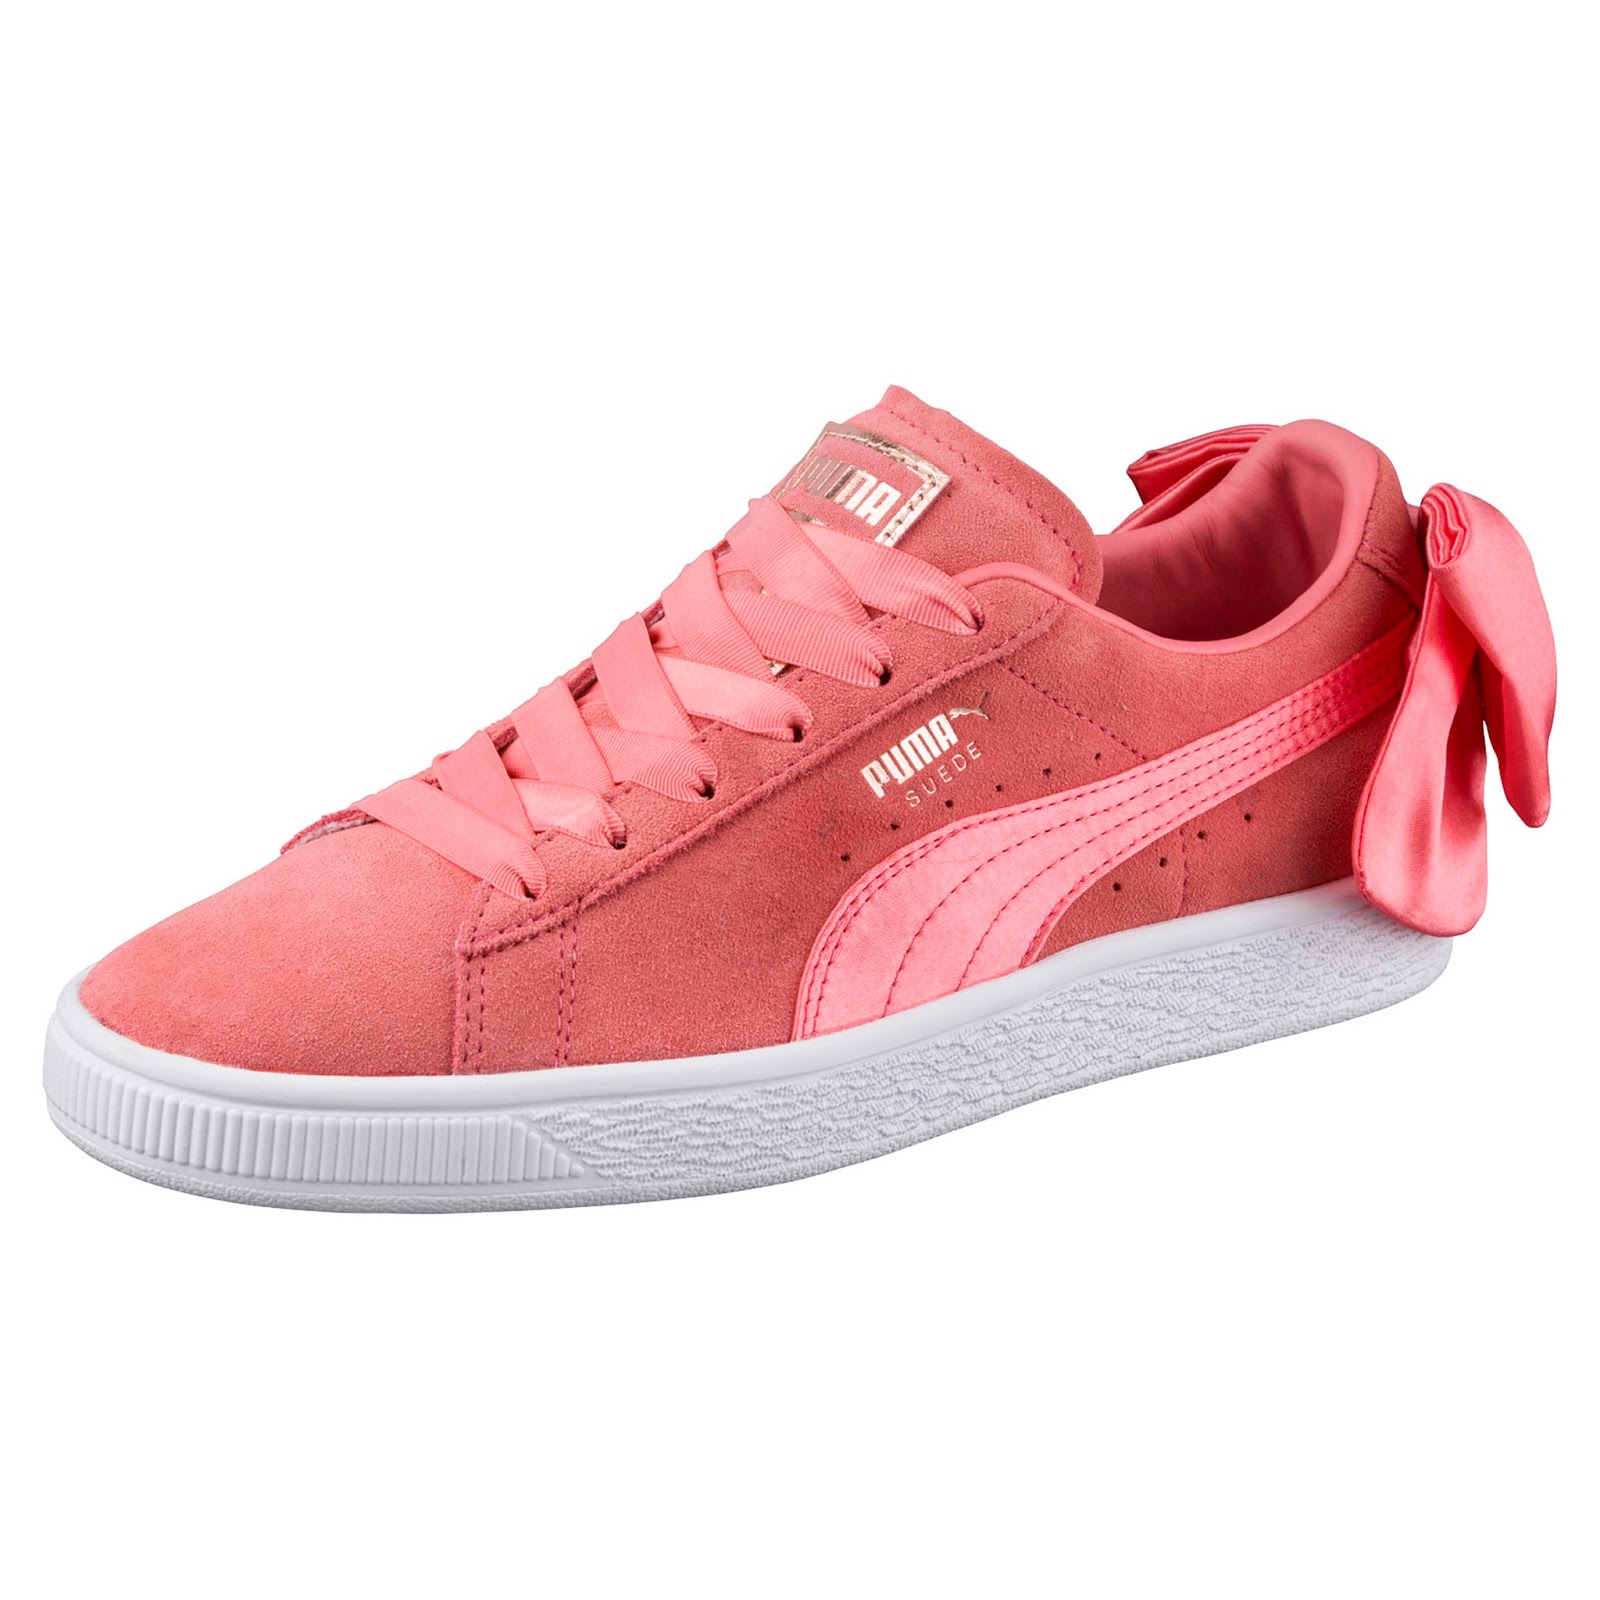 Swag Craze: First Look: Pink PUMA Bow Suedes